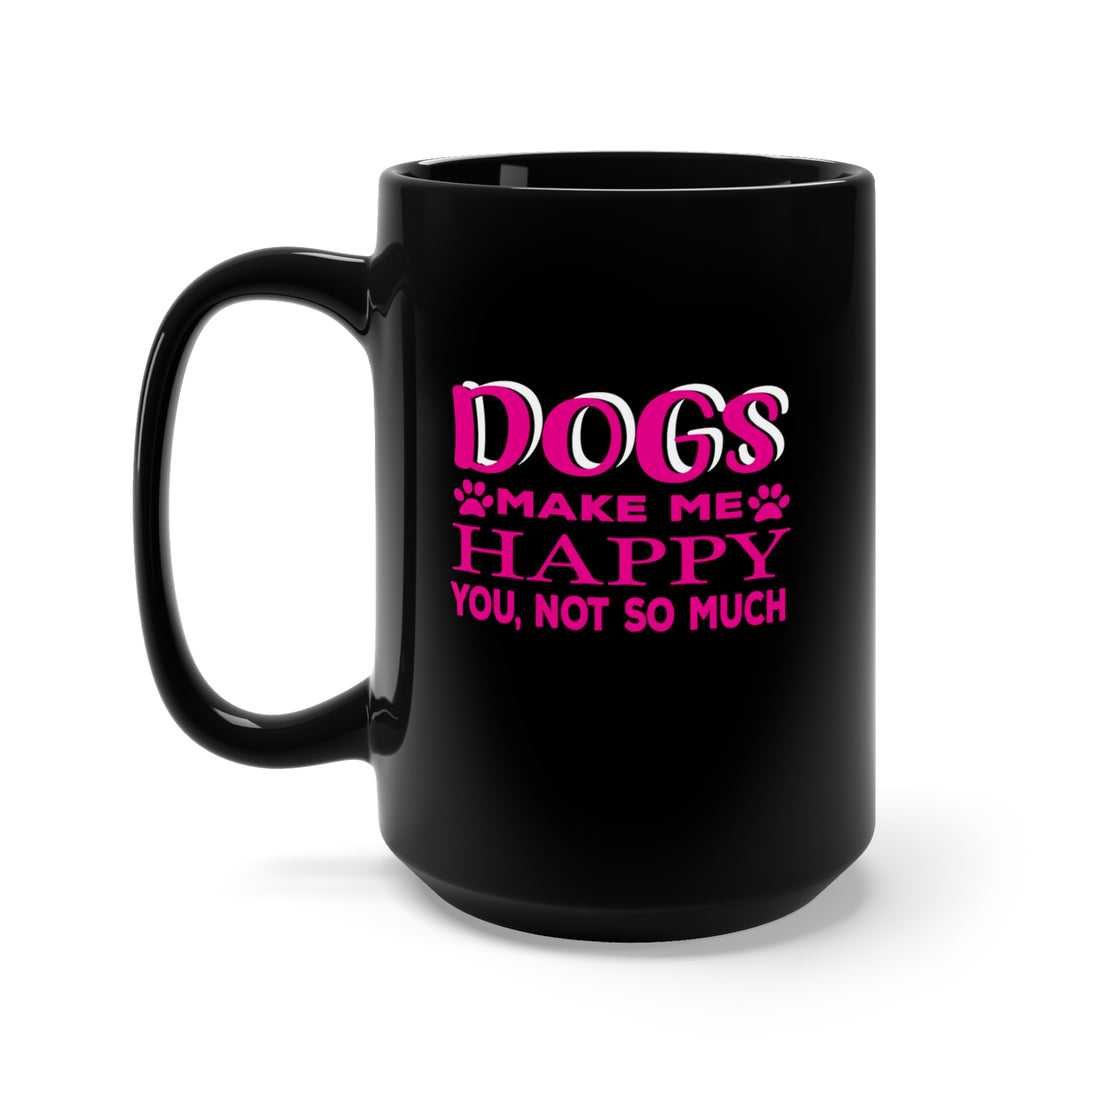 Dogs Make Me Happy You Not So Much - Large 15oz Black Mug